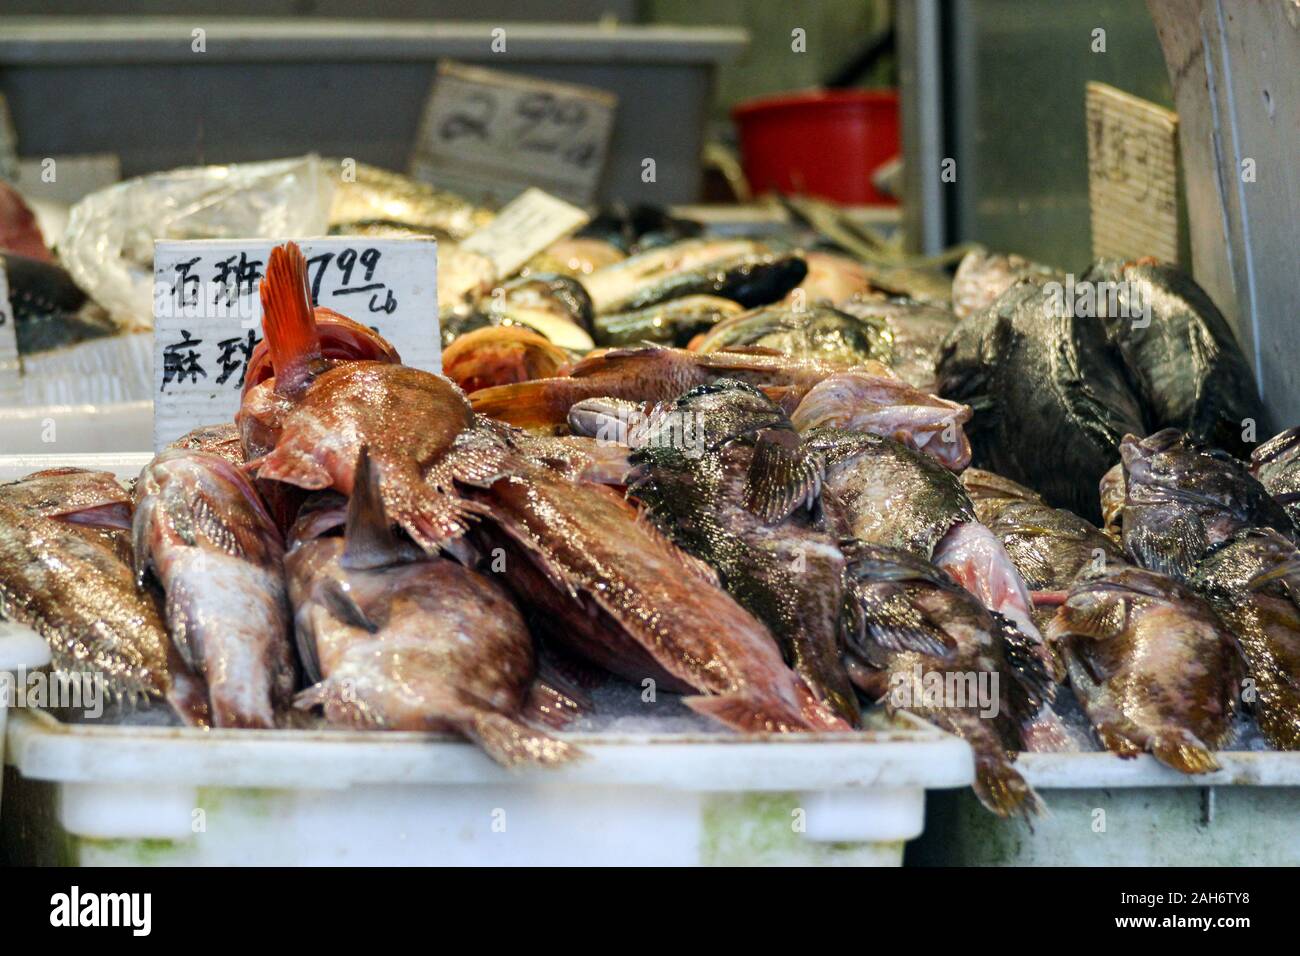 Fish for sale at Chinese fish market in San Francisco Chinatown, United States of America Stock Photo